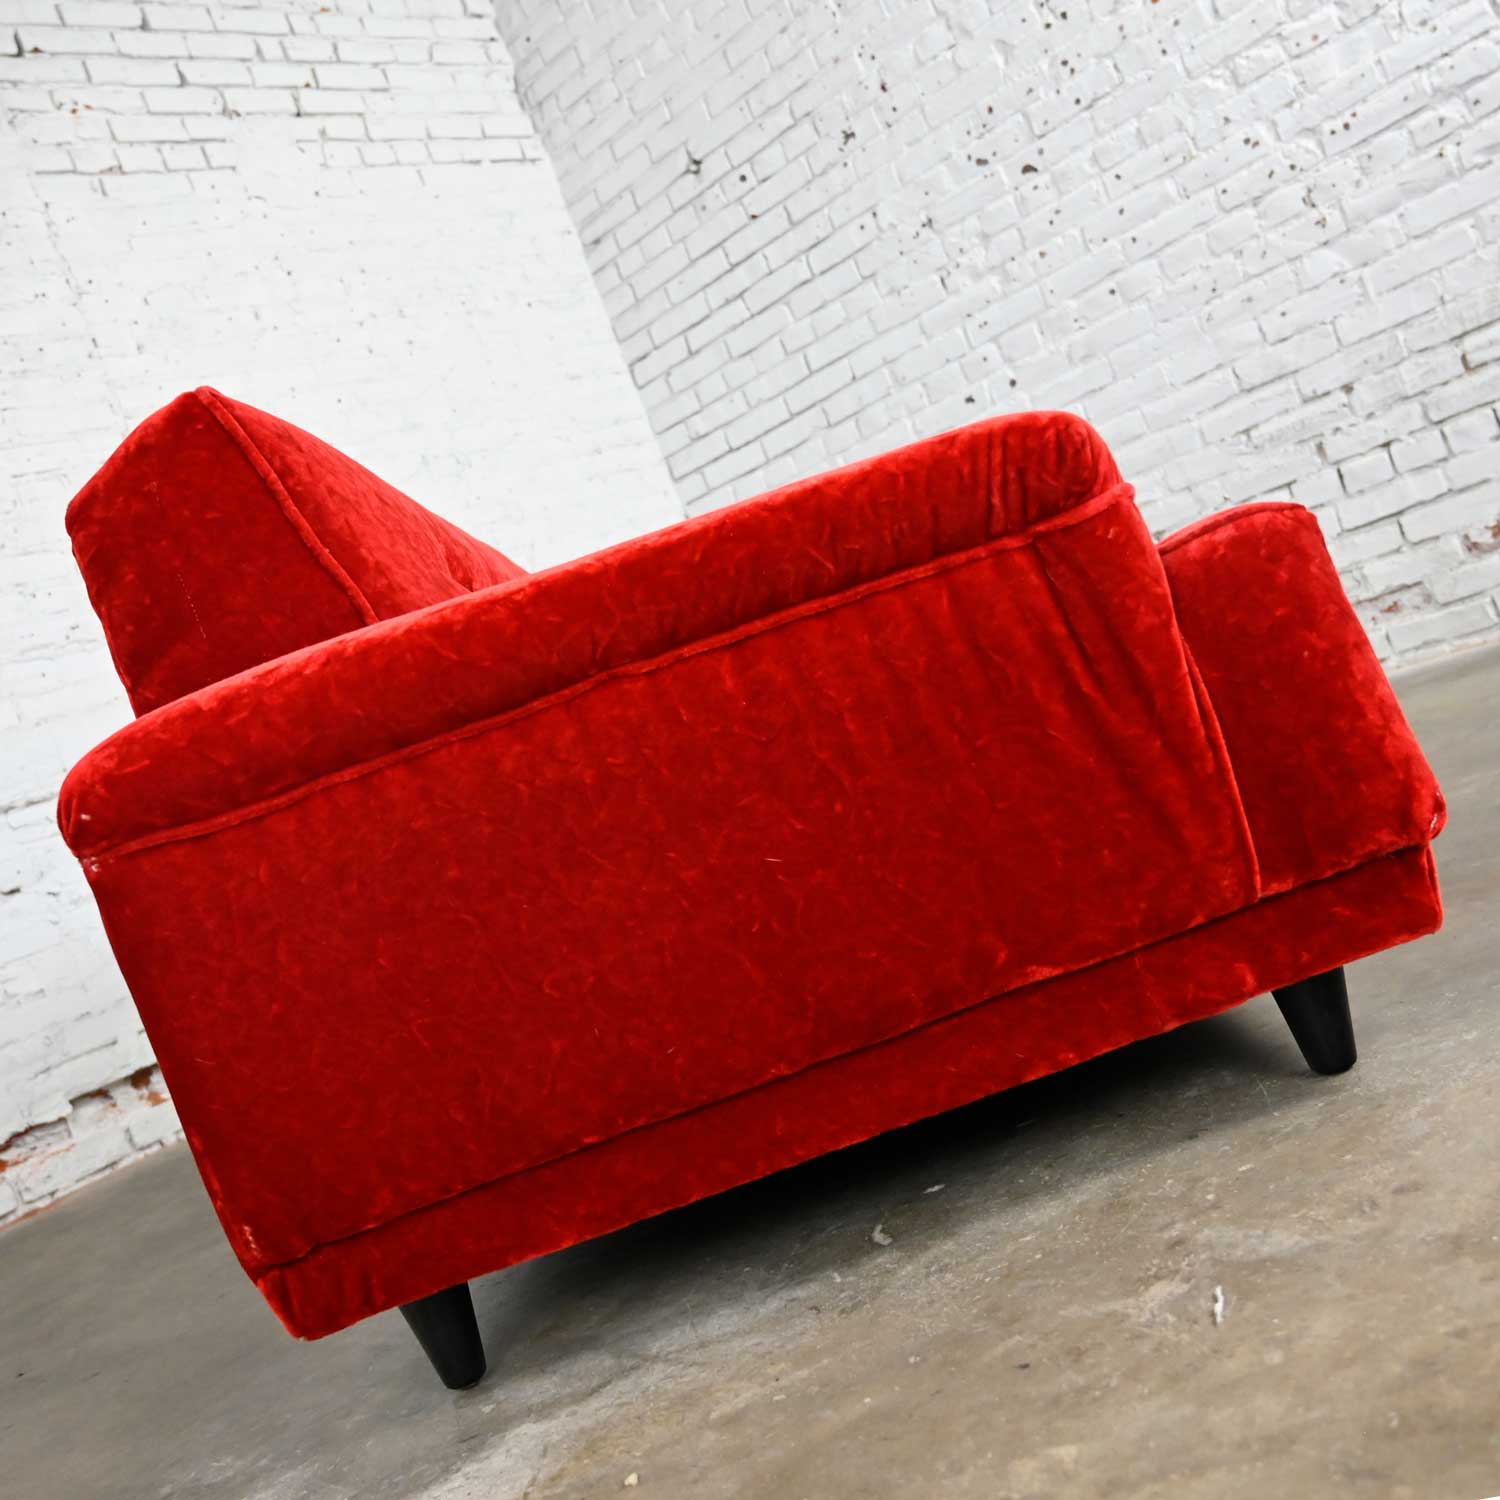 Mid Century Hollywood Regency Art Deco Style Crushed Red Velvet Chaise Lounge 1950’s